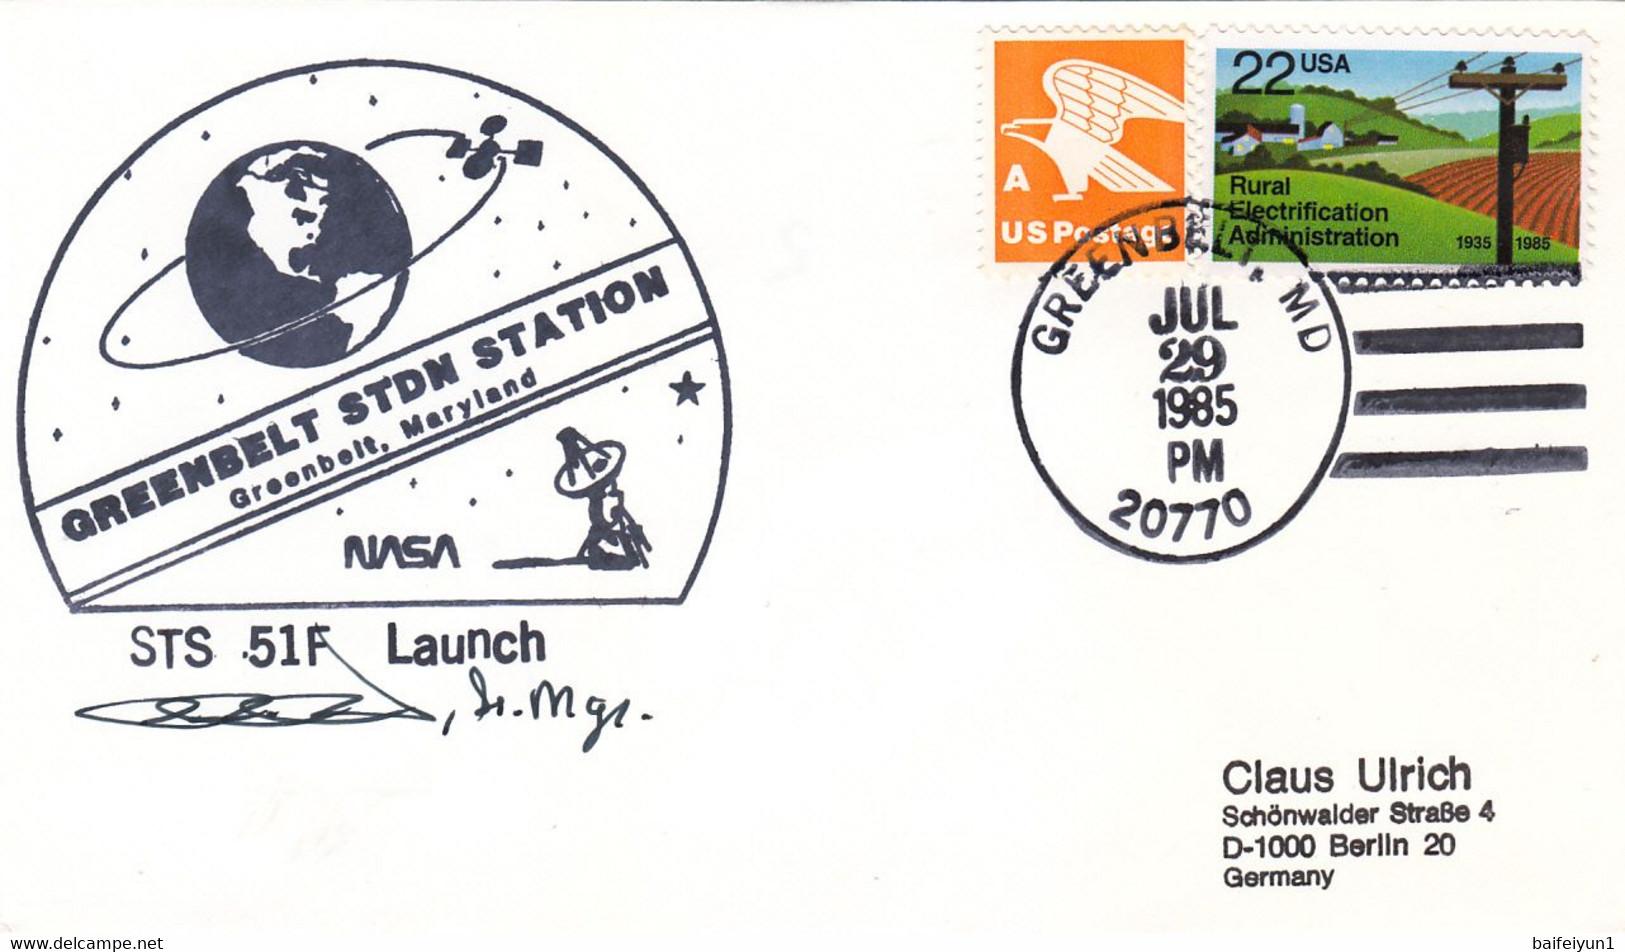 1985 USA  Space Shuttle Challenger STS-51F Mission And Greenbelt STDN STATION Commemorative Cover - North  America